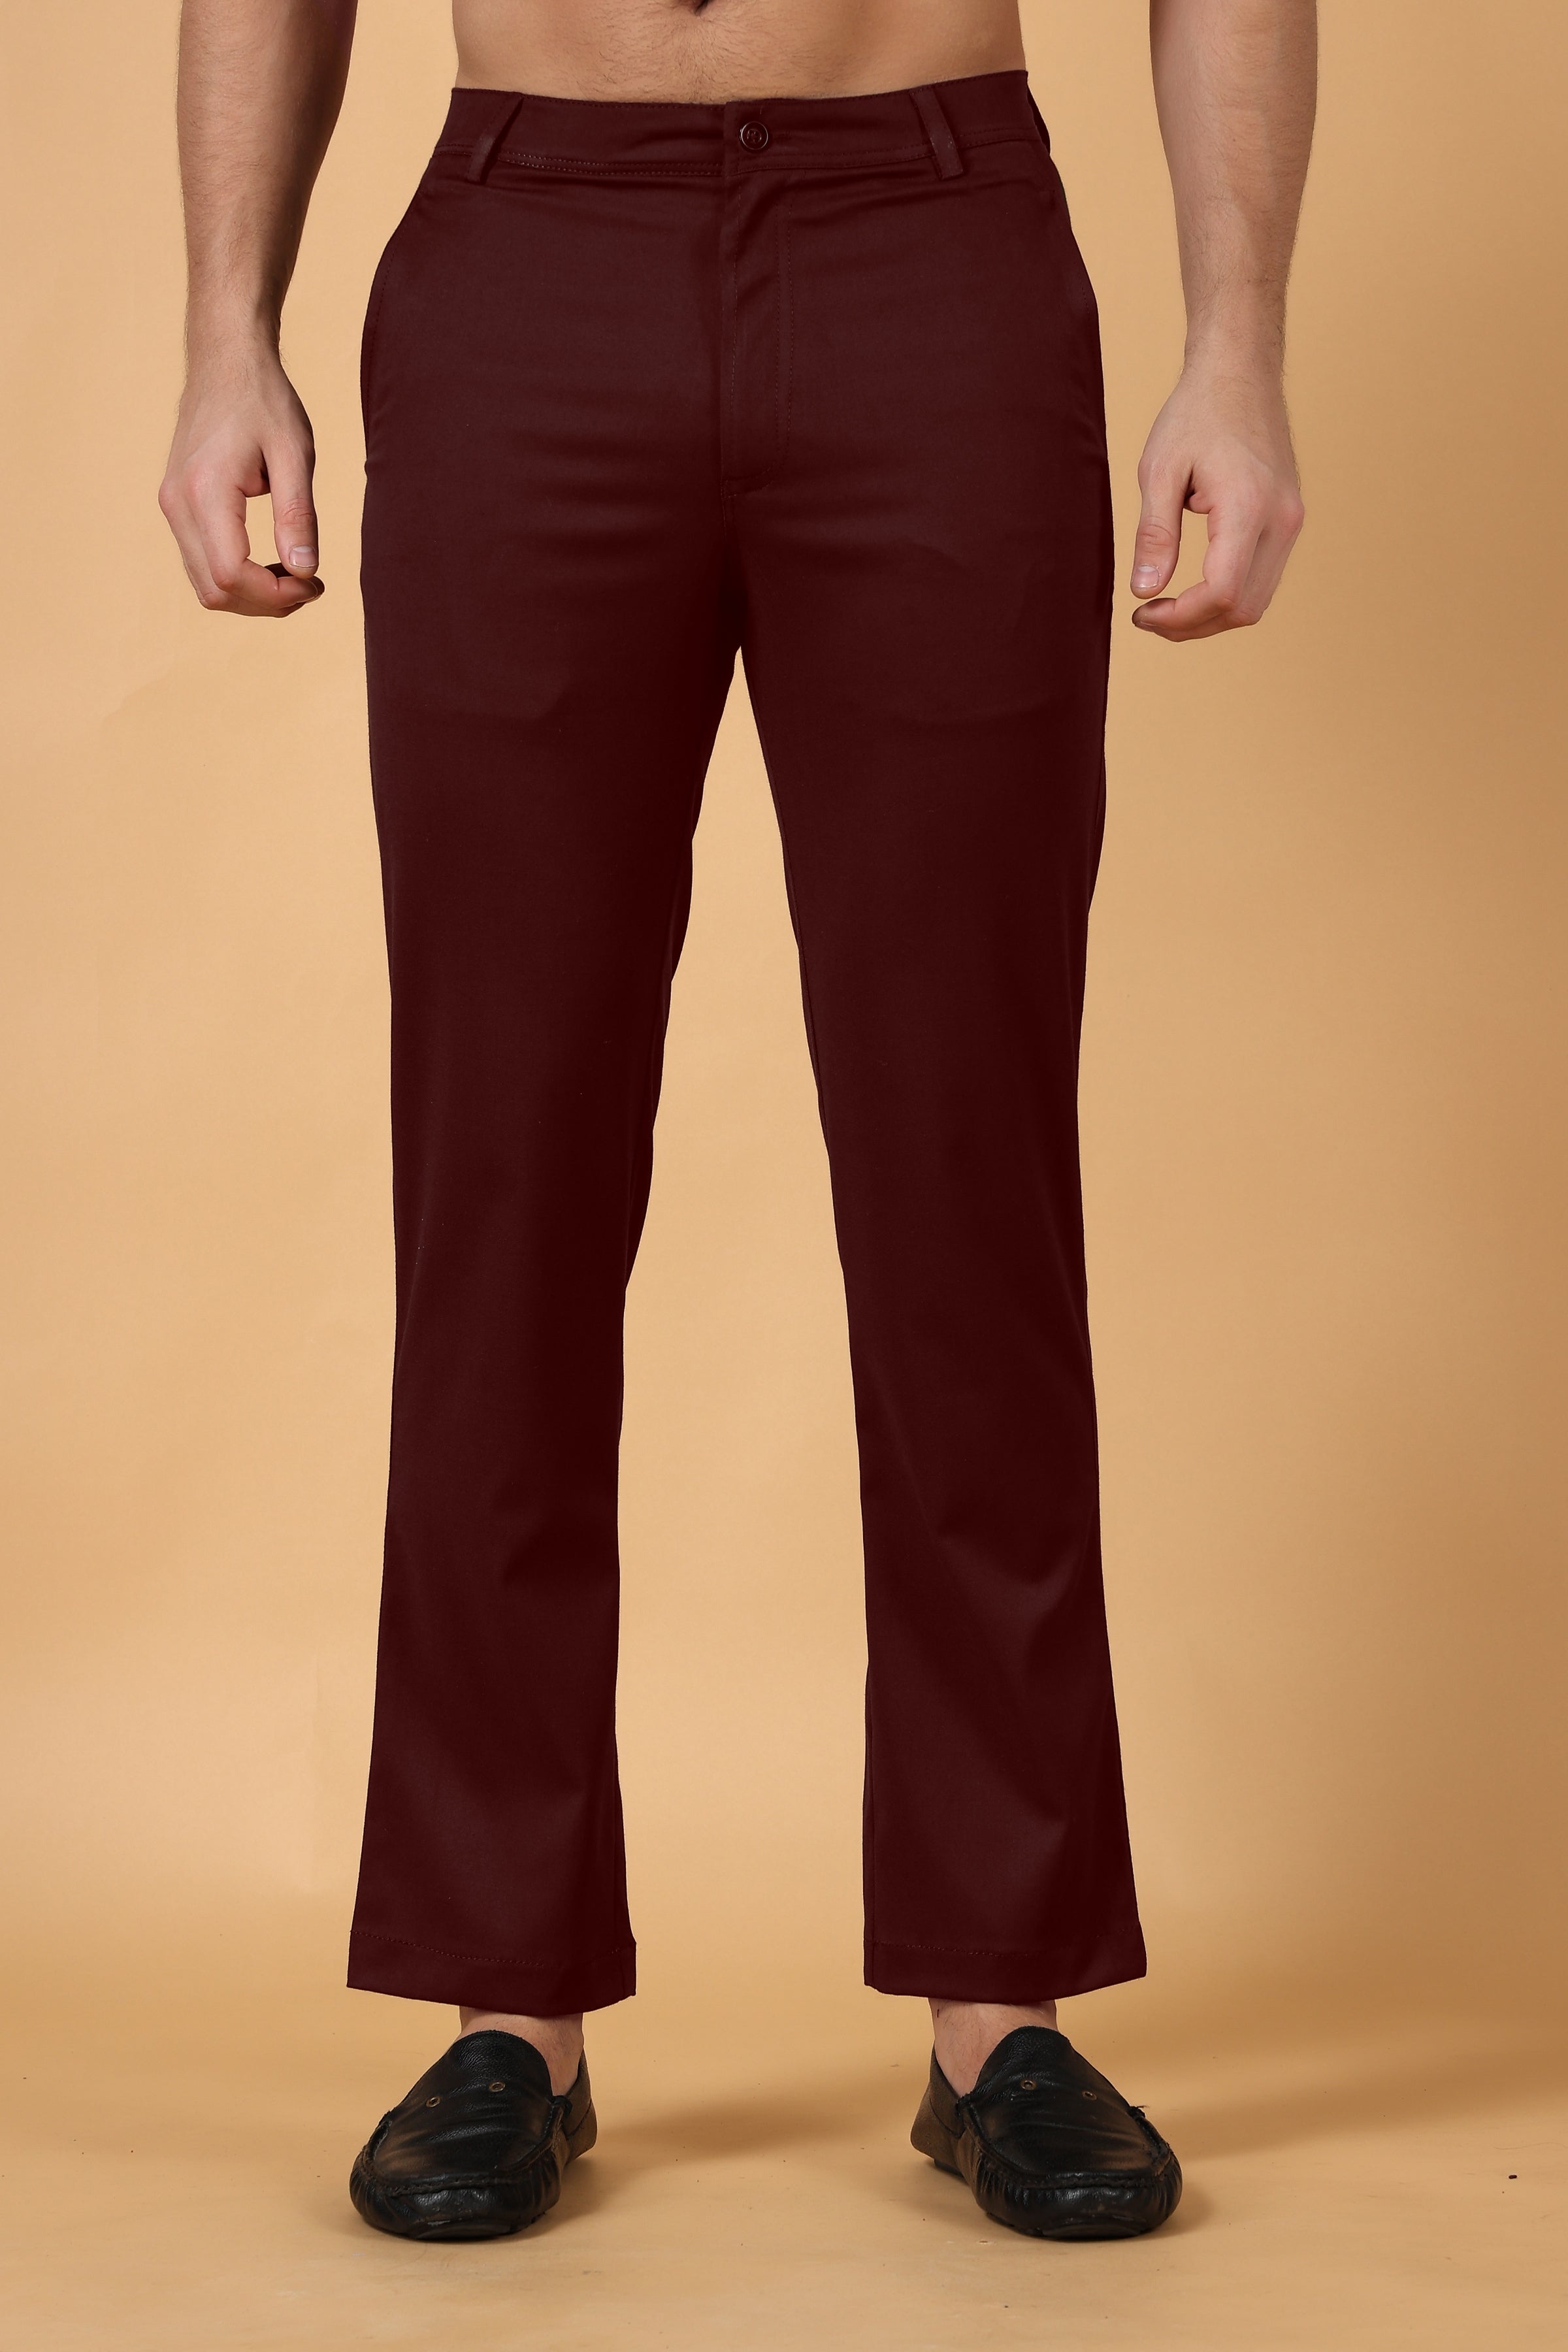 Mens pleated pants pleats and trousers definitive style guide for 2019